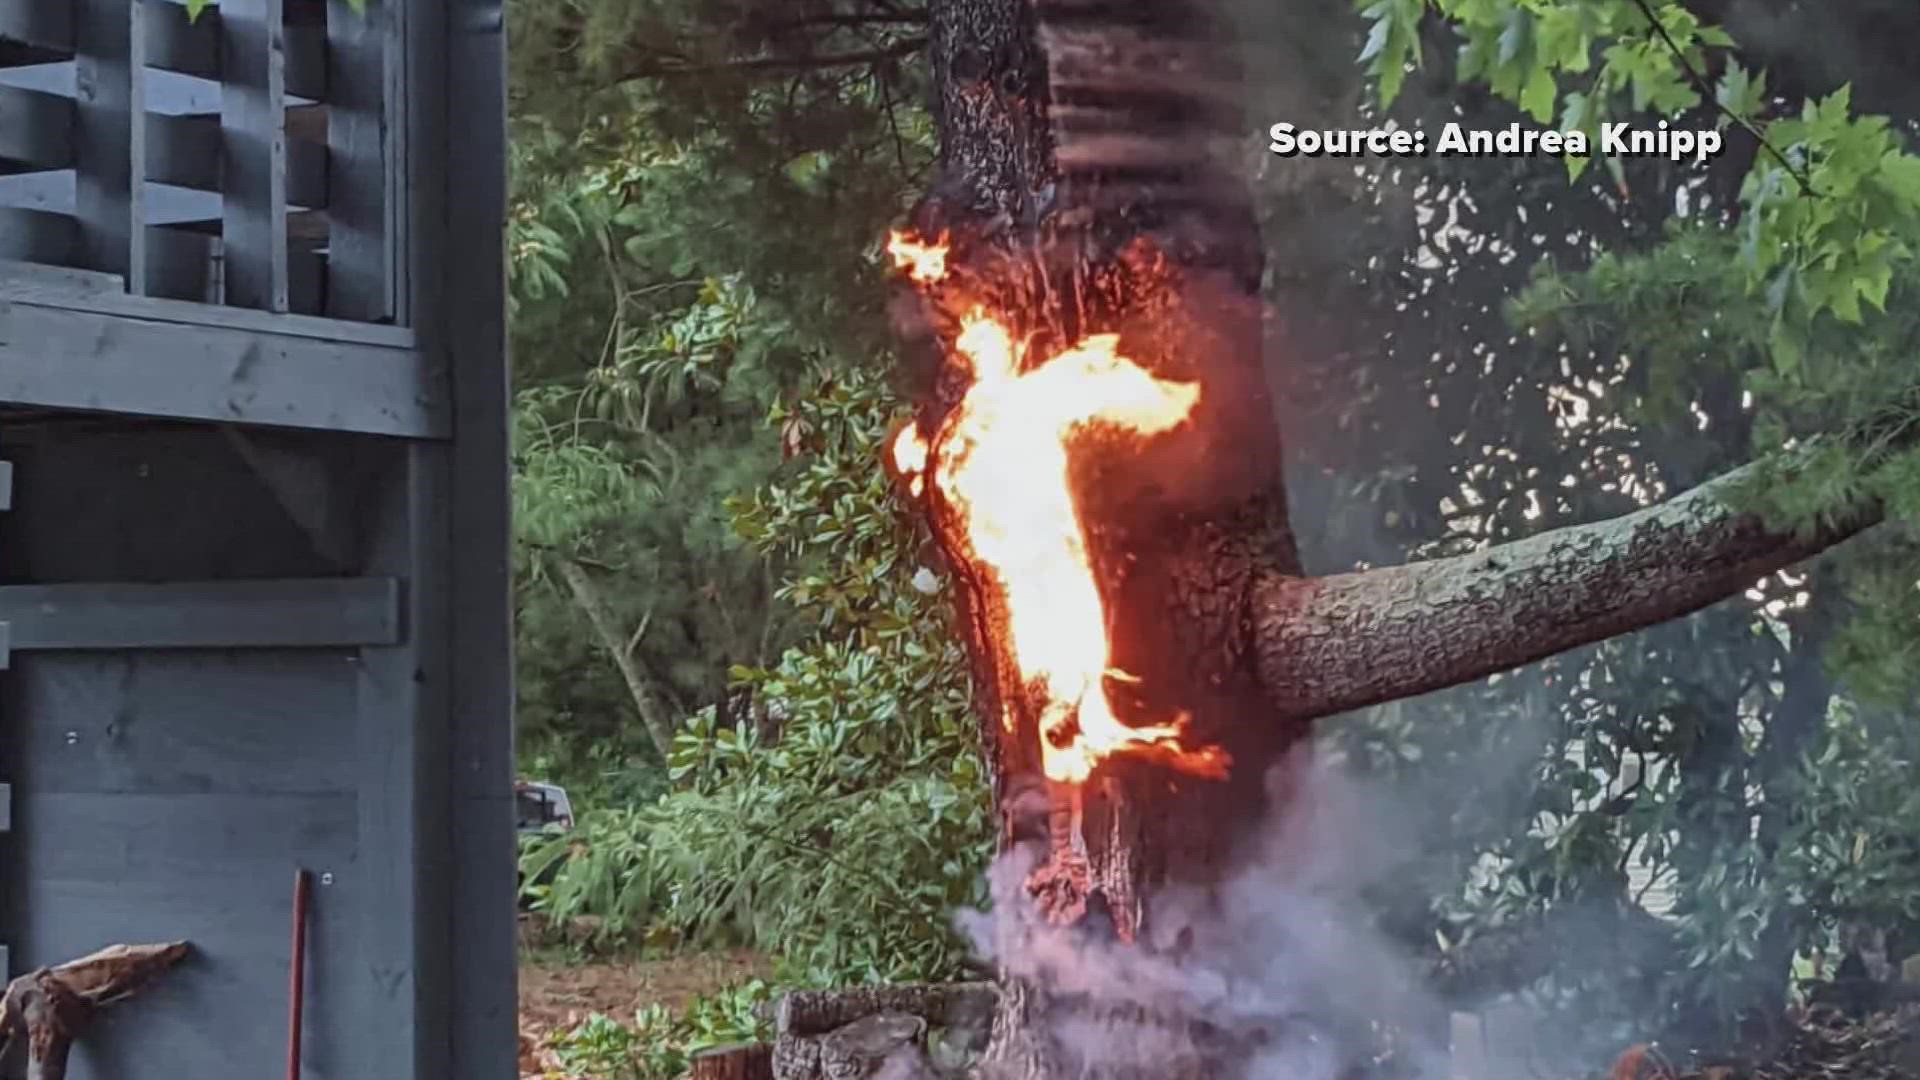 The family wasn't at home when a lightning strike started a fire in their yard.